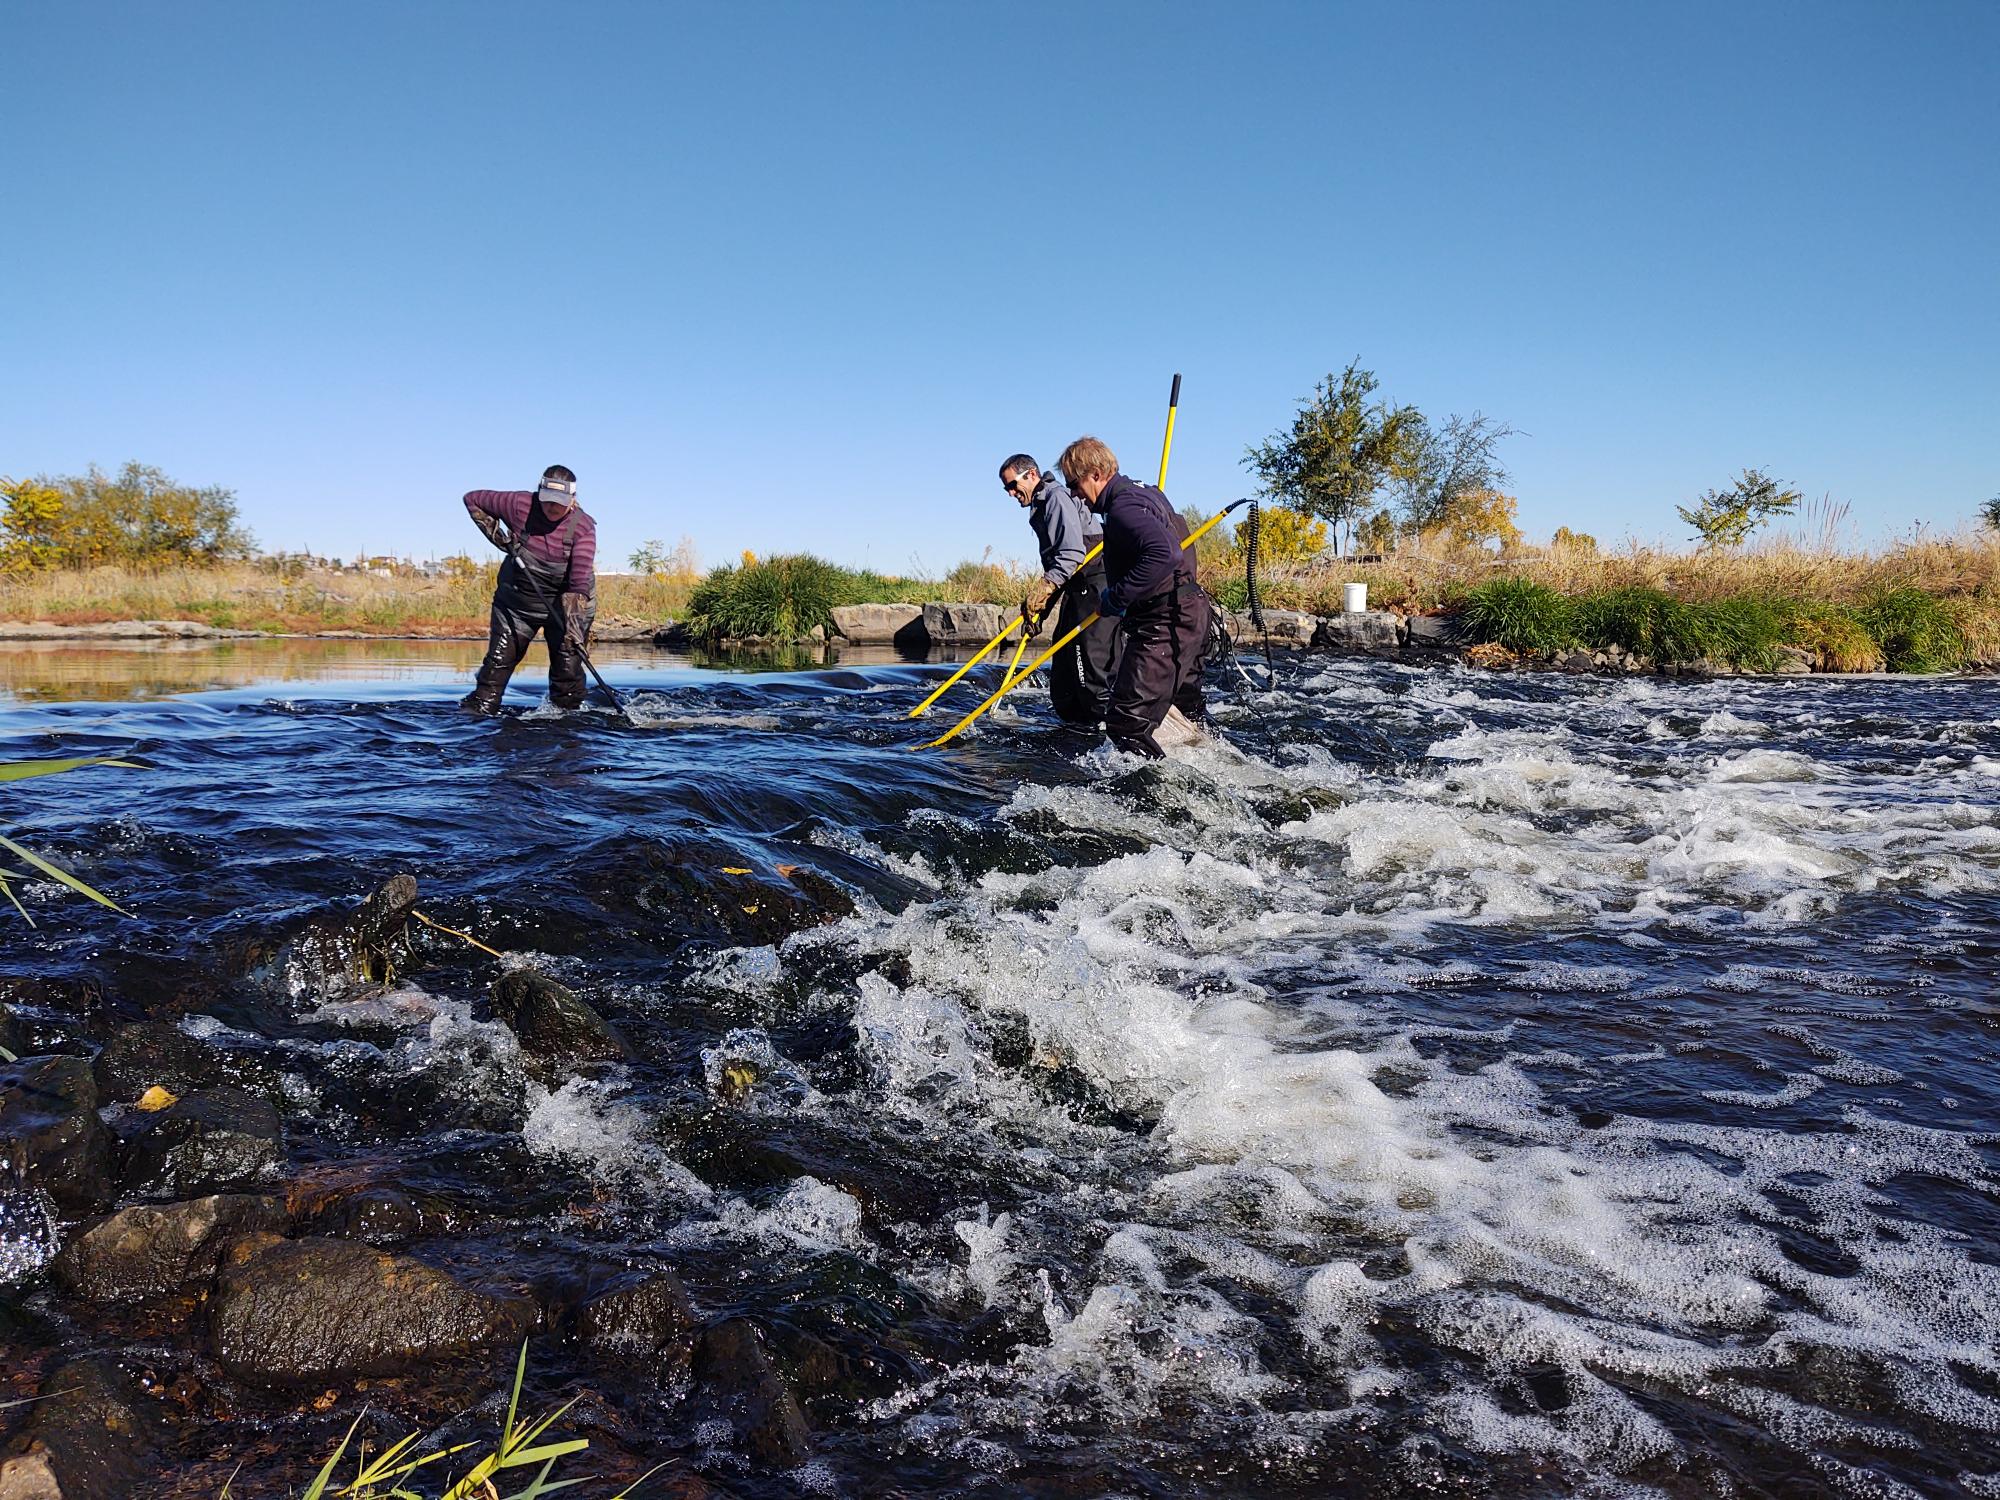 Metro's water quality division standing in a small riffle on the SOuth Platte River. The employees are holding nets, which they use to collect stunned fish so that they can be recorded and released back into the river.